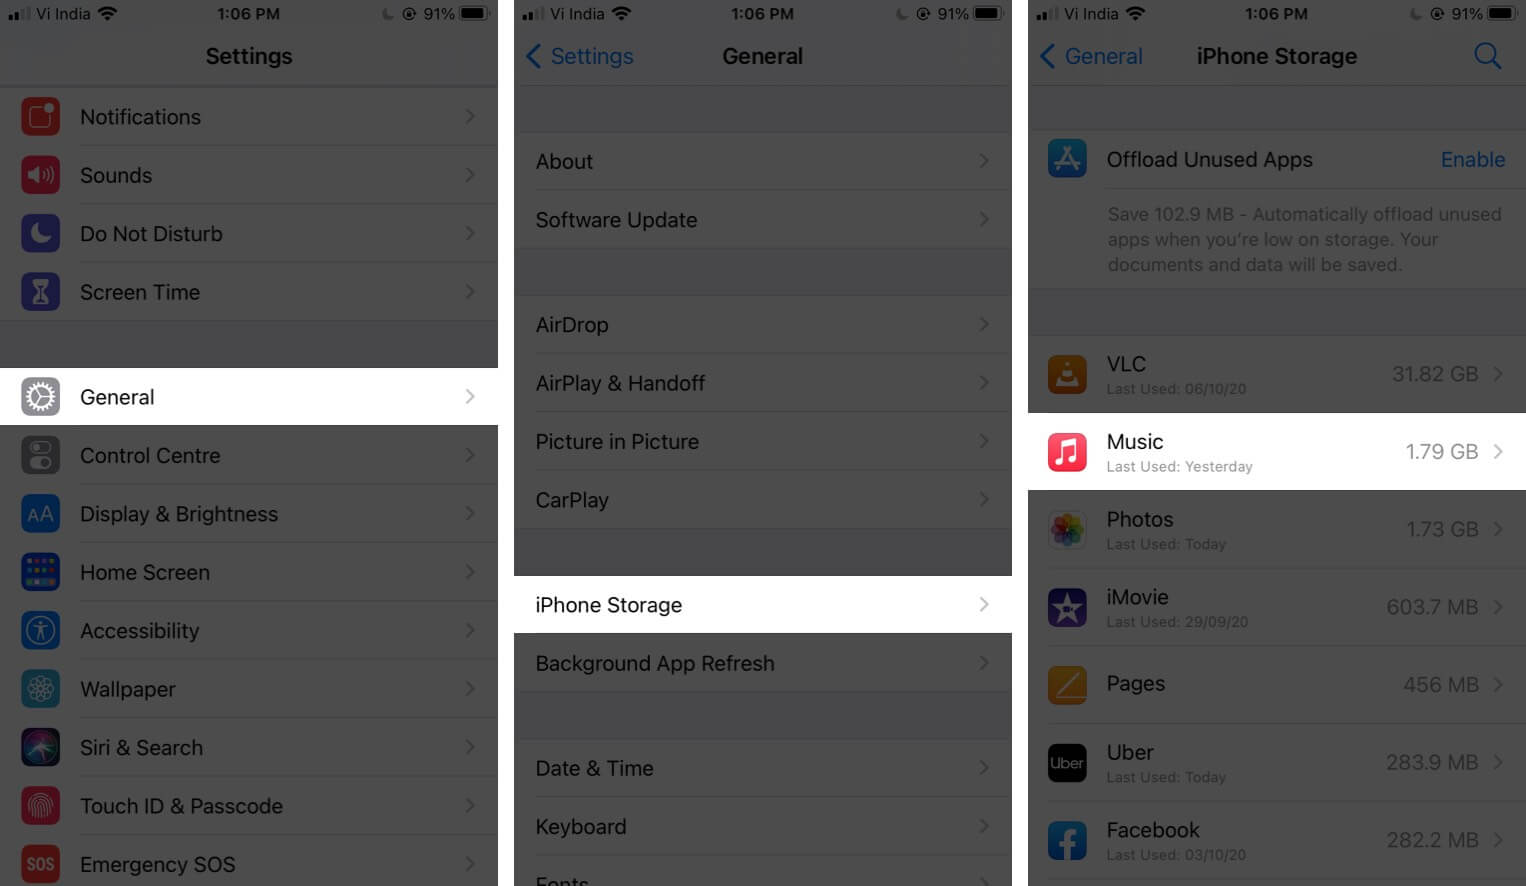 Tap on General and iPhone Storage Then Tap on Music in iPhone Settings